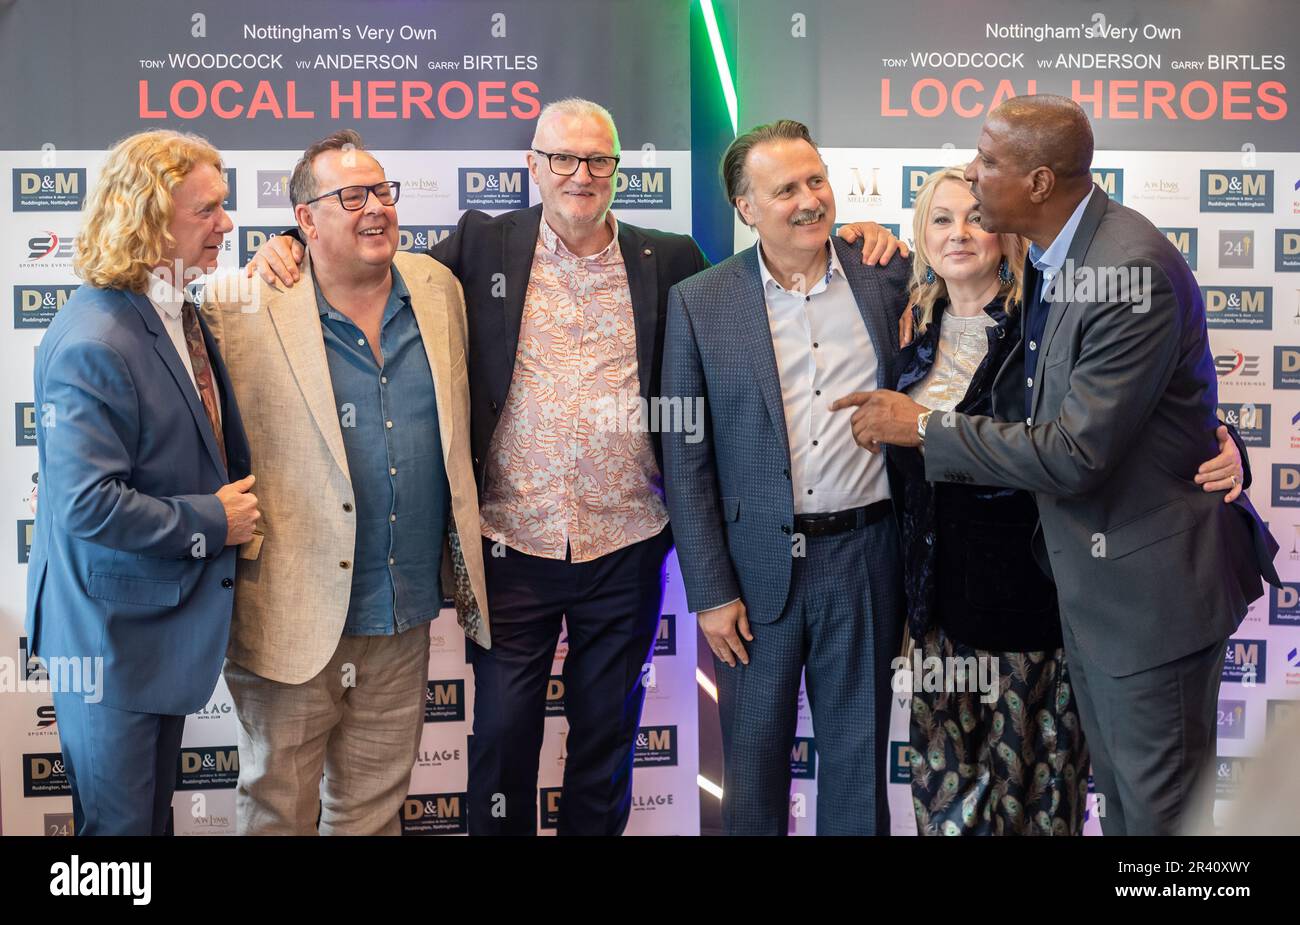 Tony Woodcock, John Warrington,Gary Birtles, Gary Webster, Wendy-Turner Webster and Viv Anderson (from left to right) during the World Premiere of the documentary Local Heroes at the Arc Cinema, Beeston, Nottingham on 25 May, 2023  (Photo by Ritchie Sumpter/Alamy Live News) Stock Photo